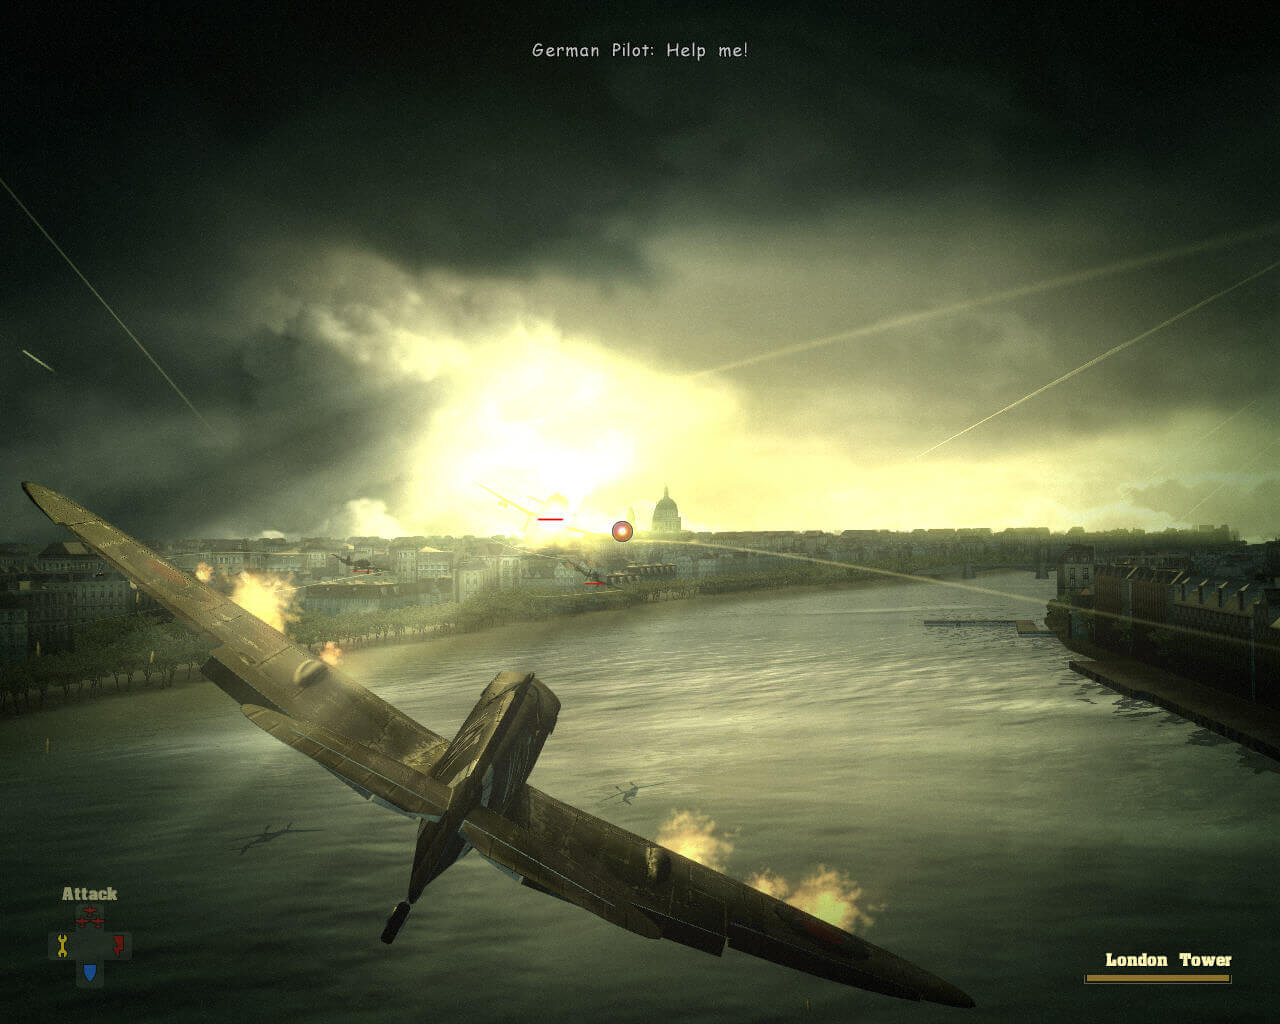 Blazing Angels: Squadrons of WWII - PS3 buy